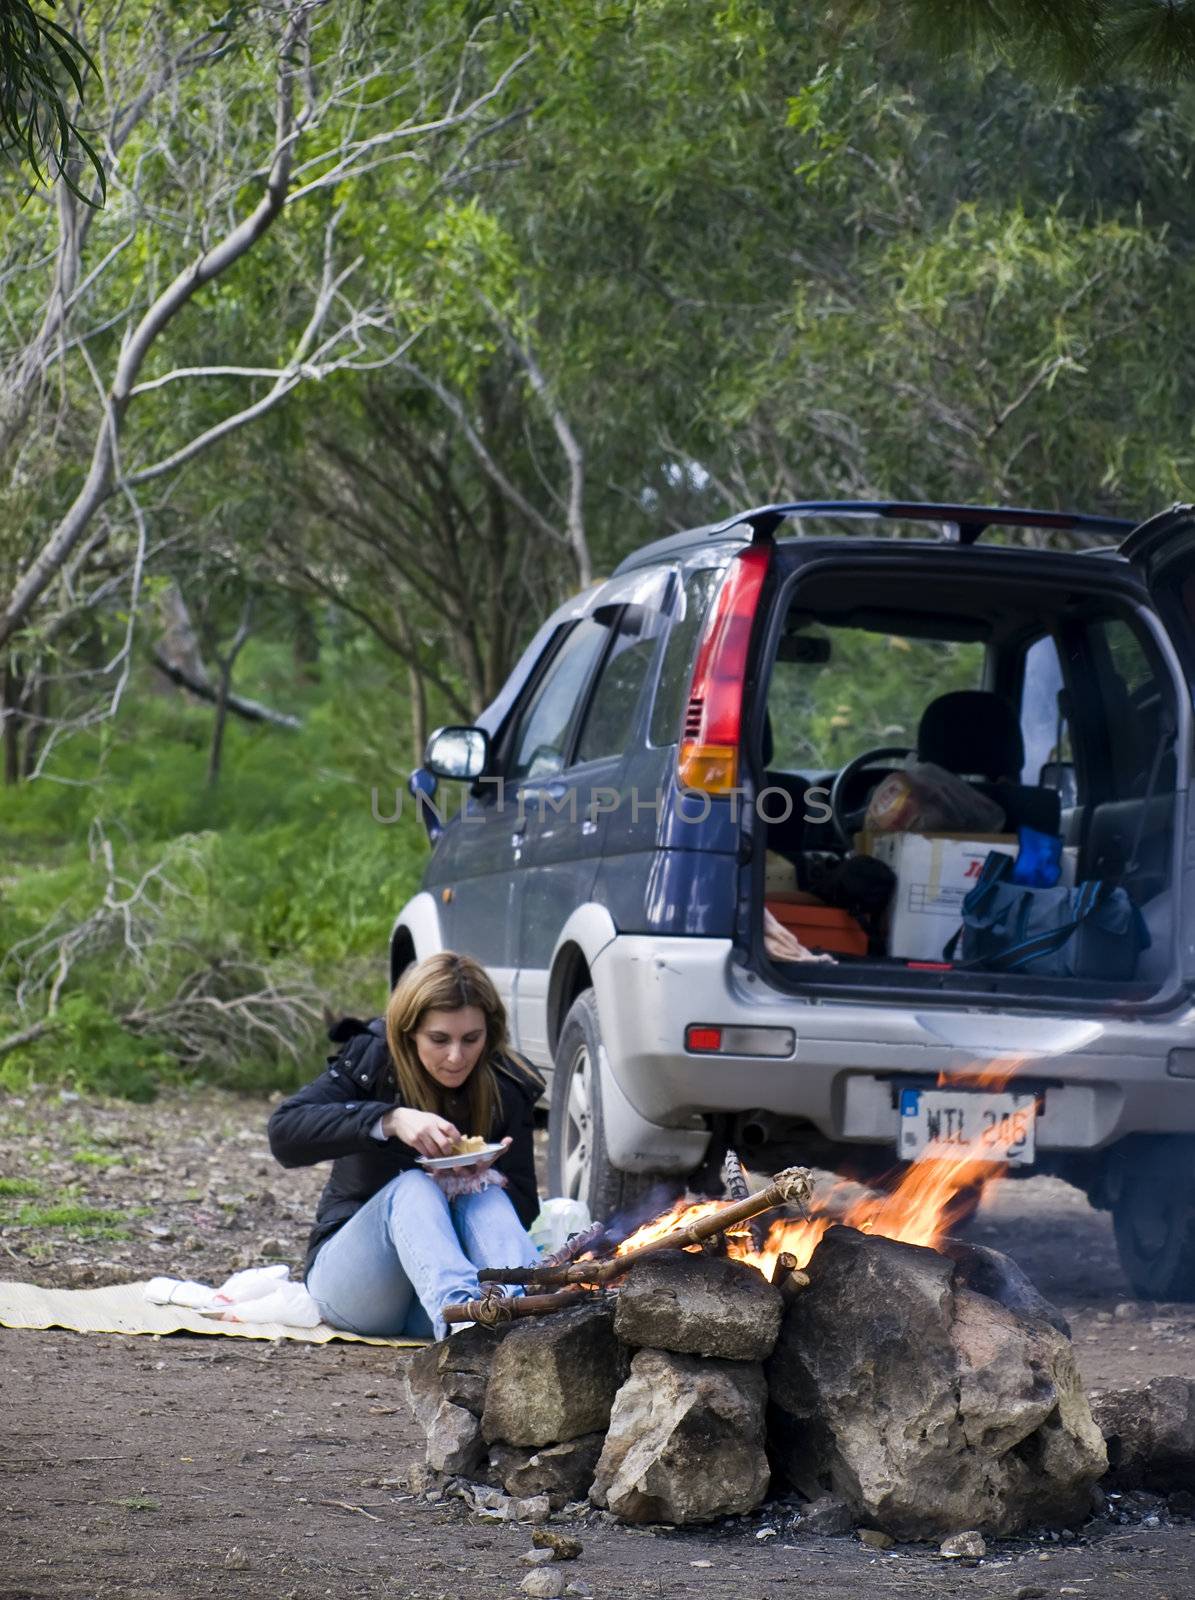 A woman and SUV next to burning bonfire excellent to portray outdoor leisure activities such as camping